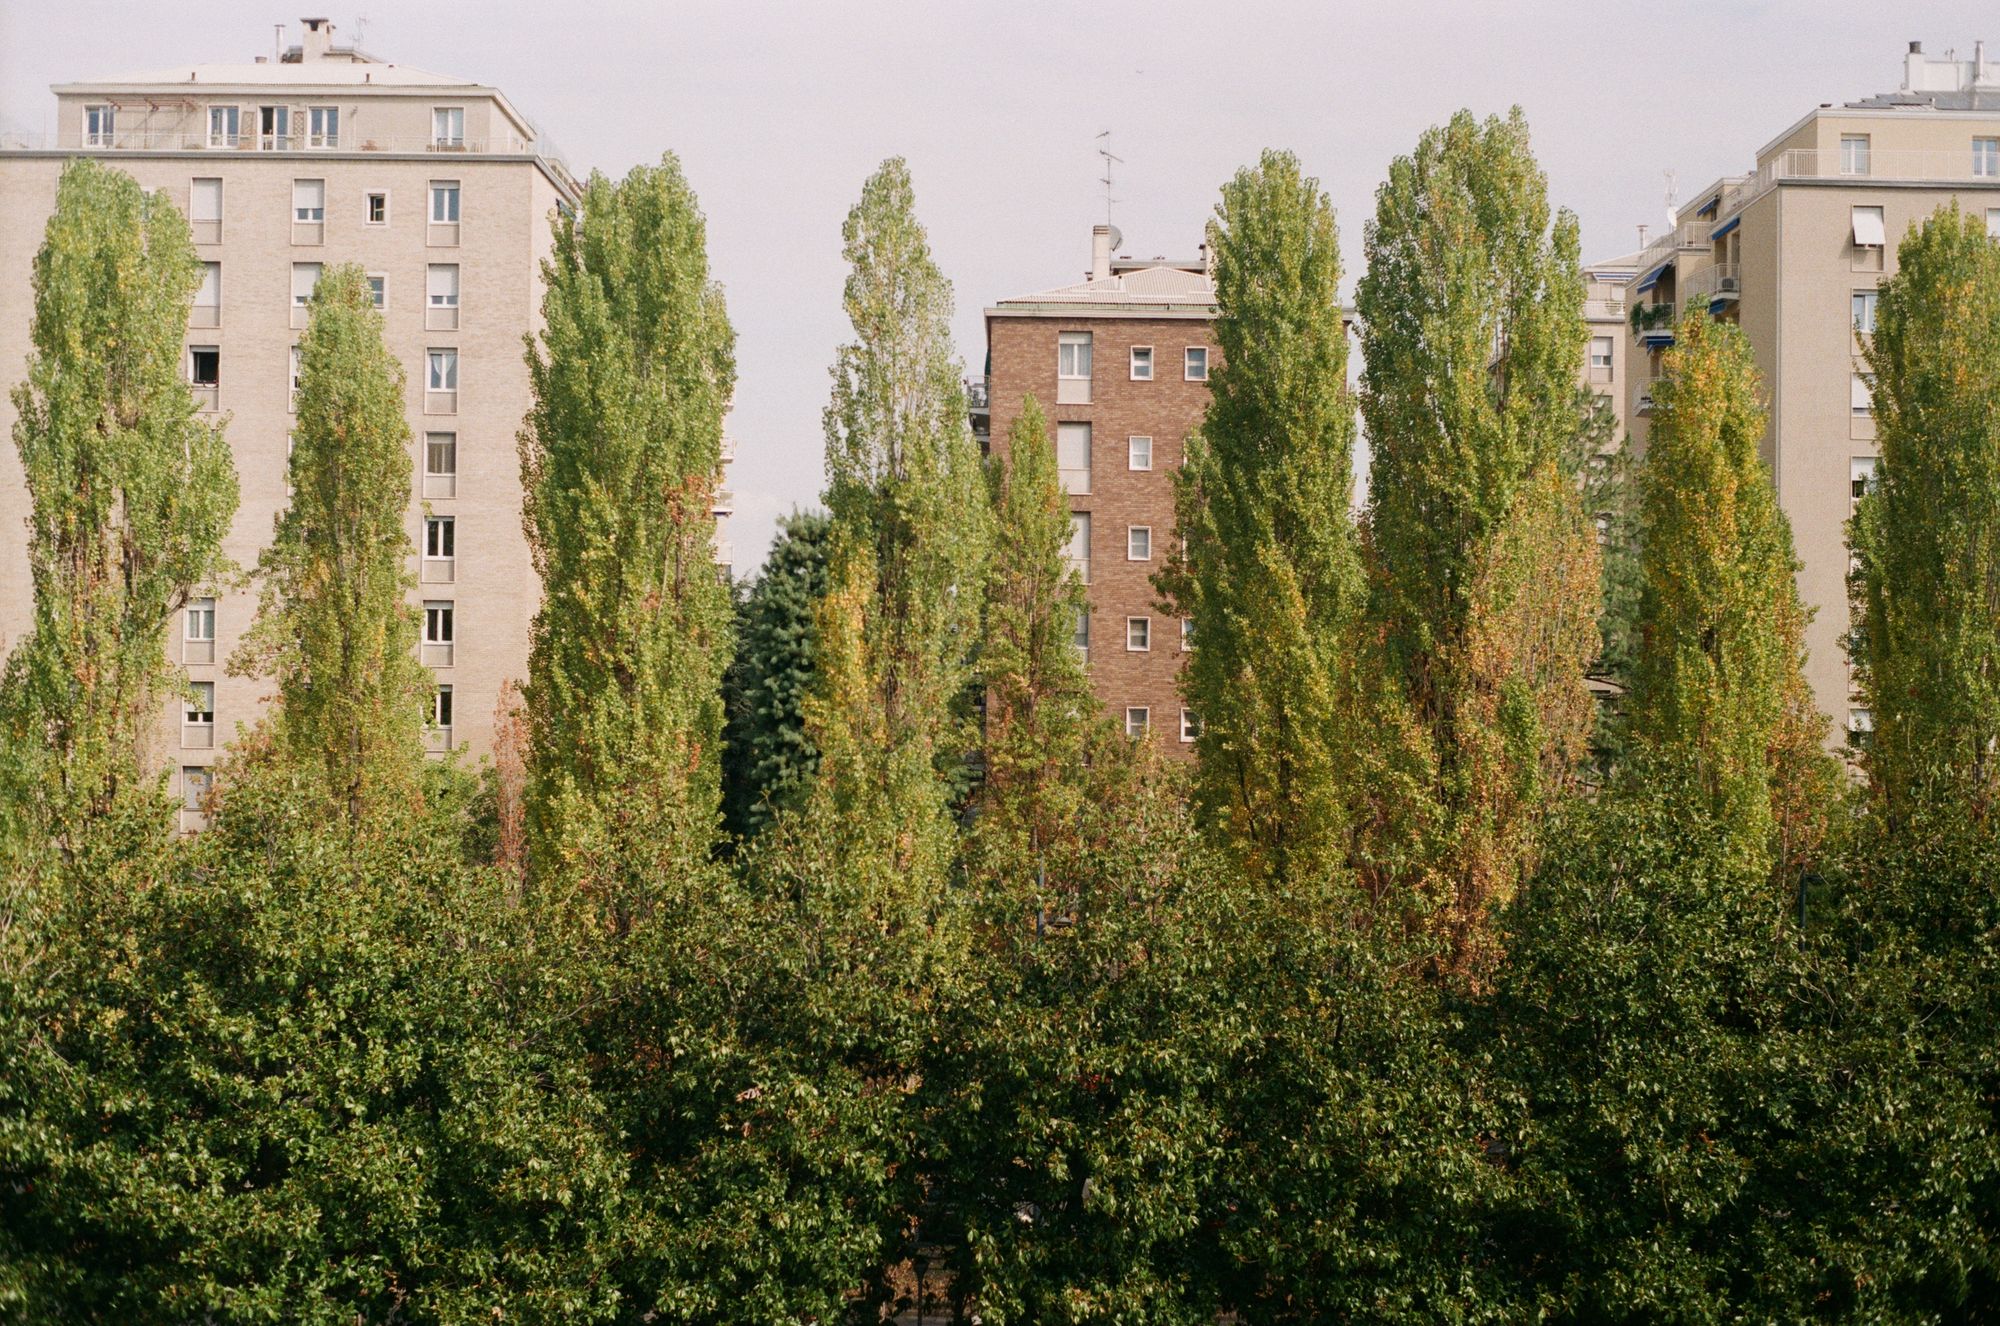 A row of tall green trees in front of apartment blocks.